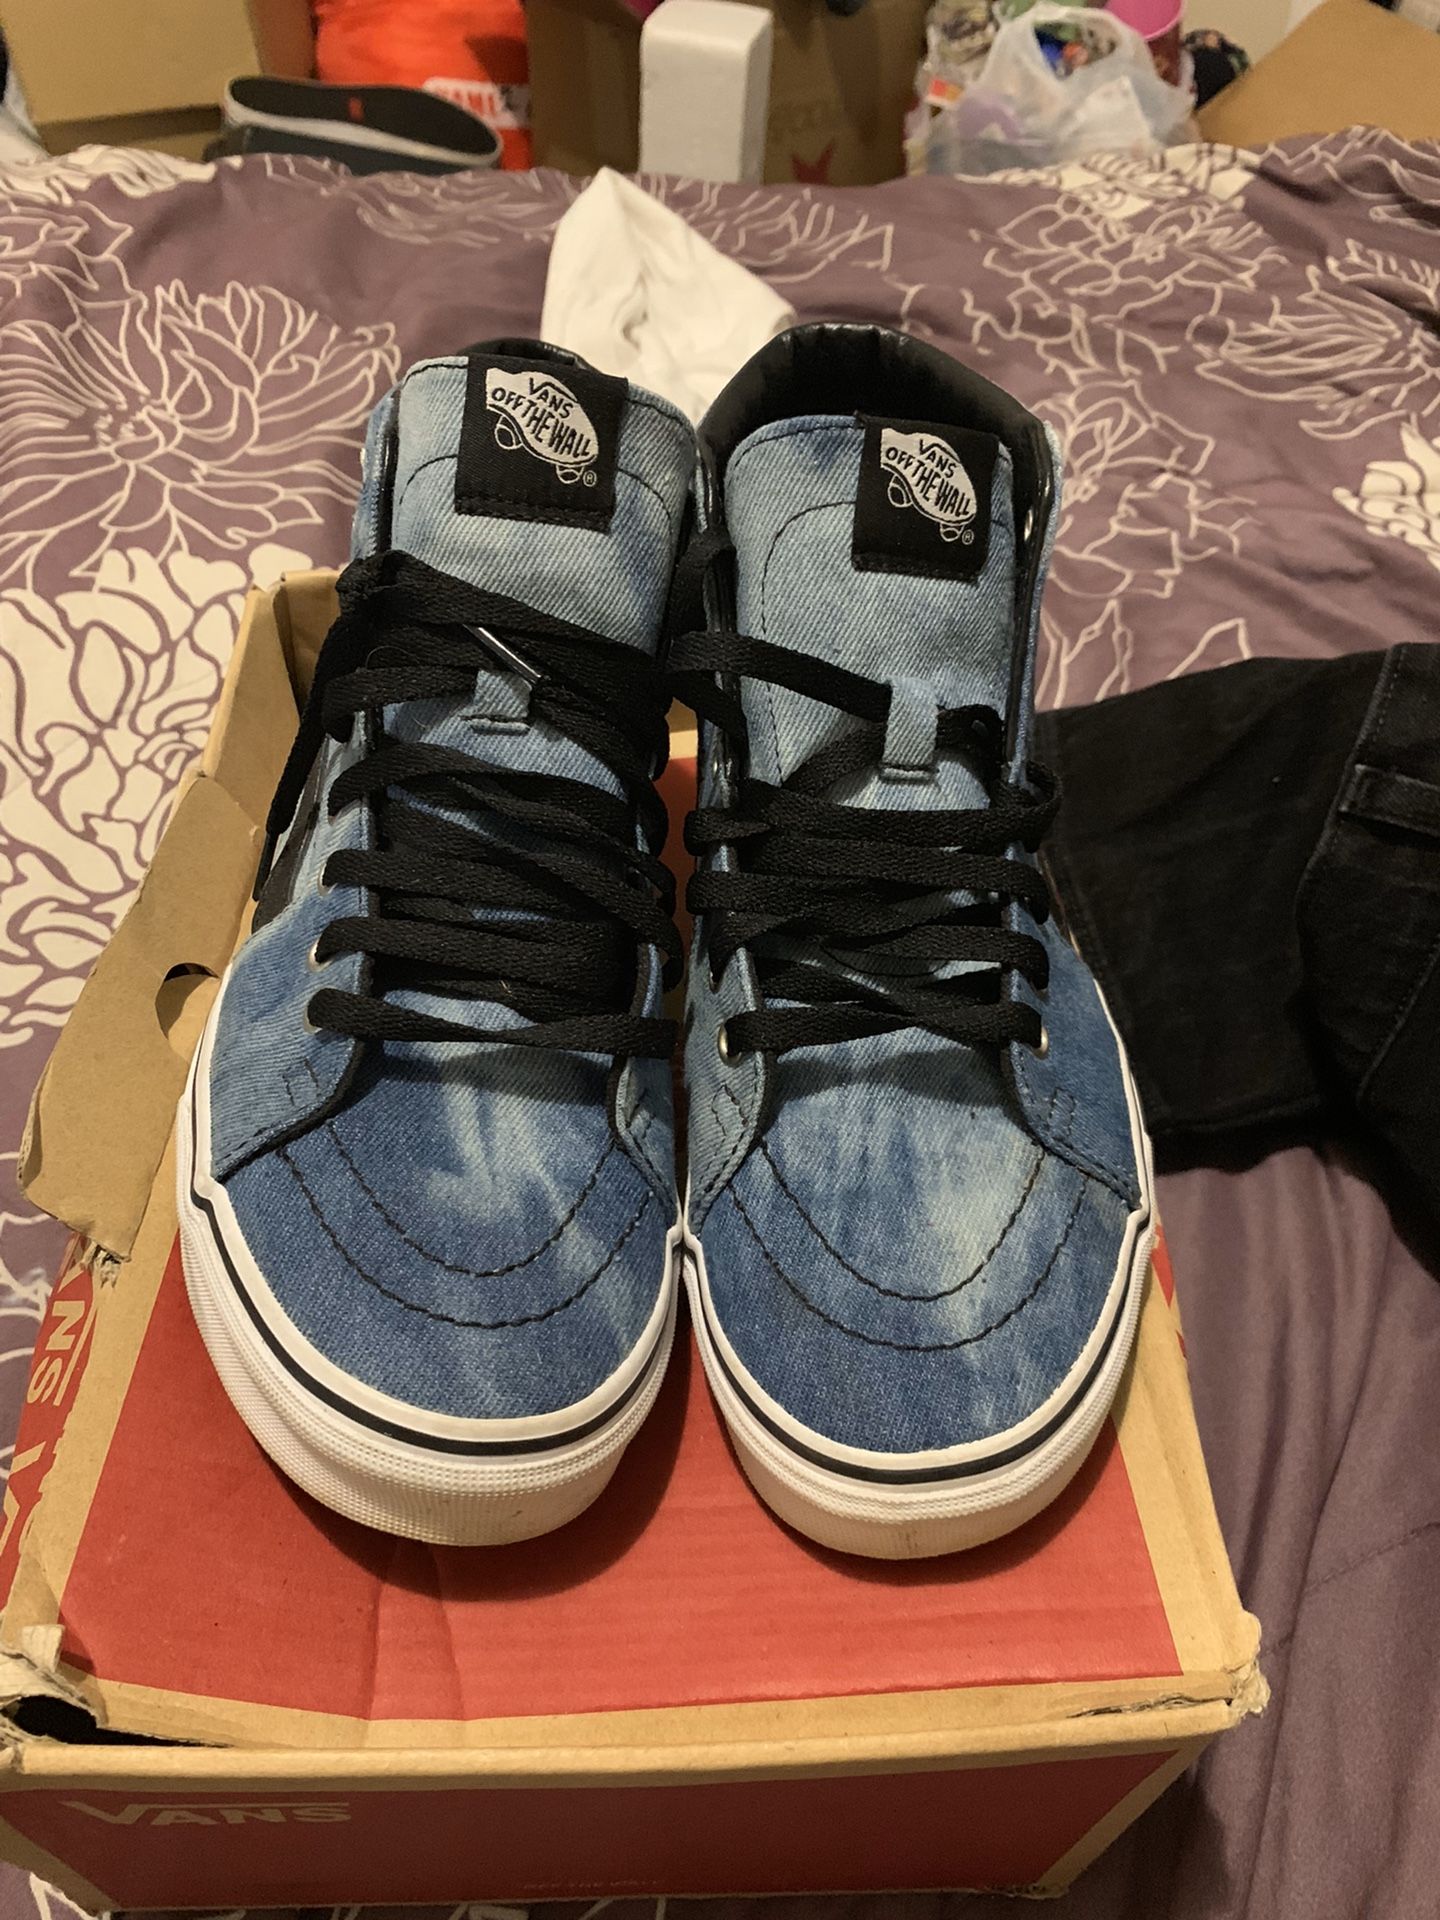 MARKED DOWN! Extremely gently used VANS/size 8 women/6.5 men